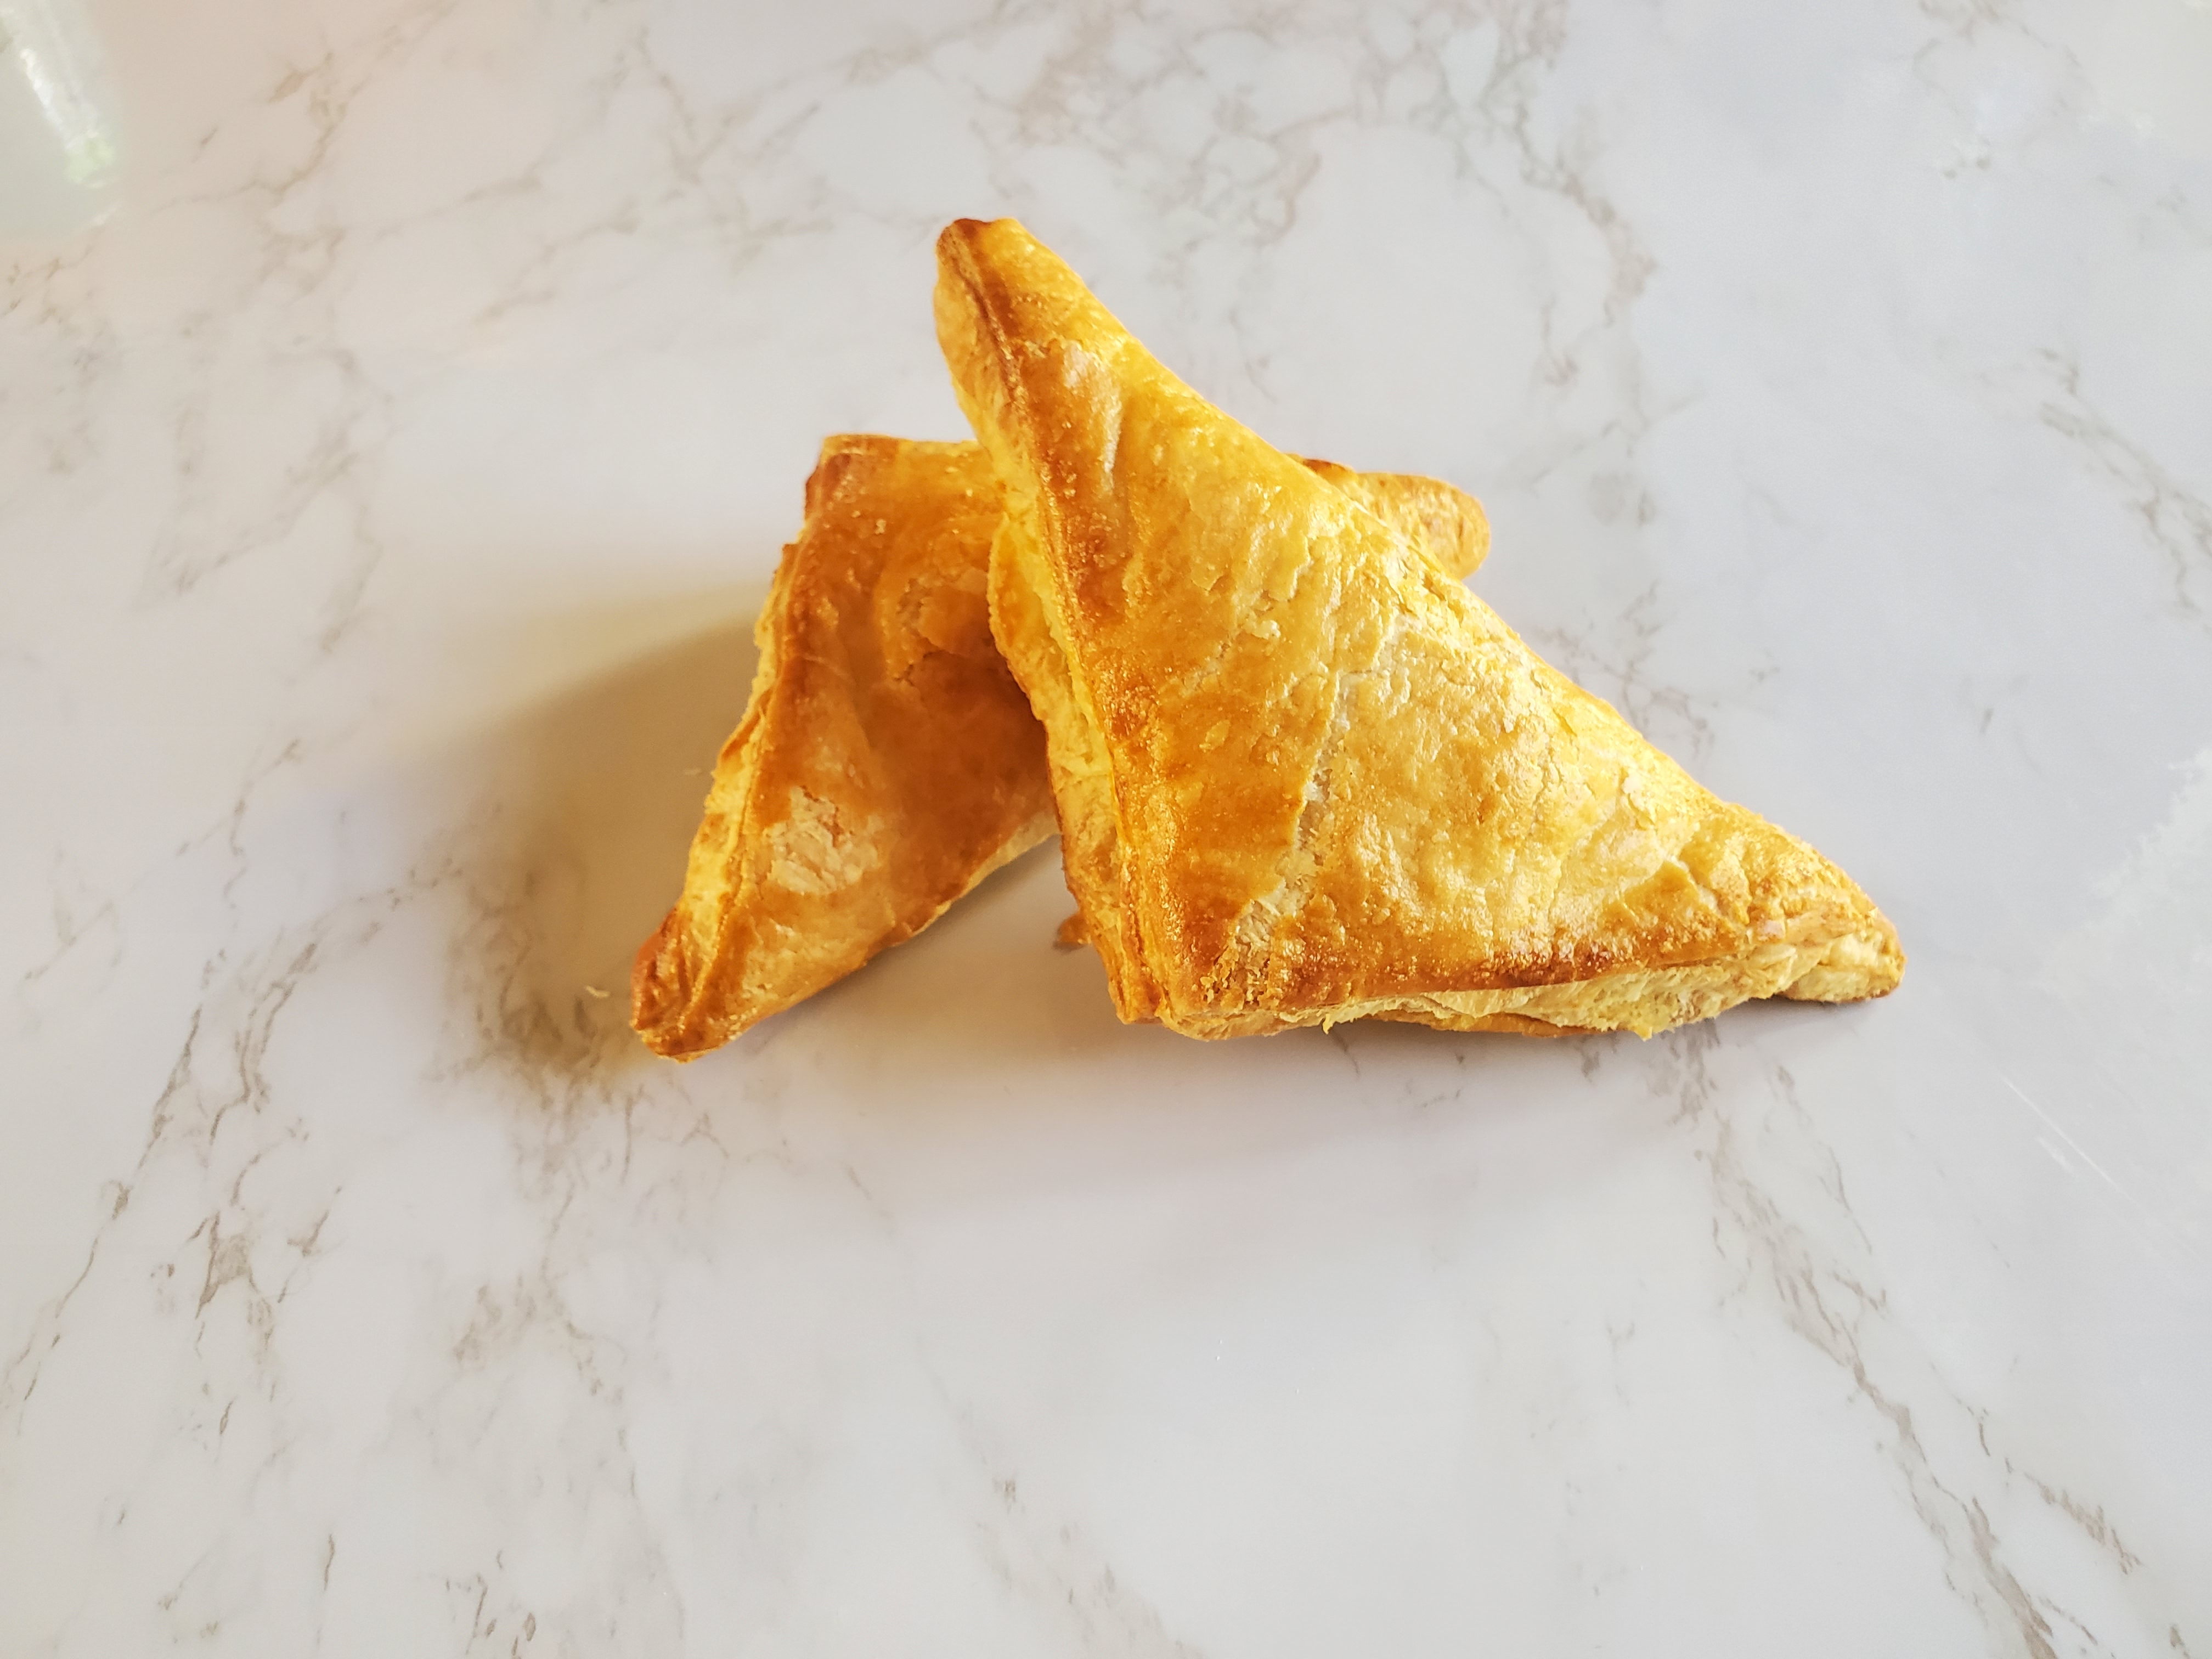 Two triangular beef curry puffs stacked on top of each other on a white marble countertop.